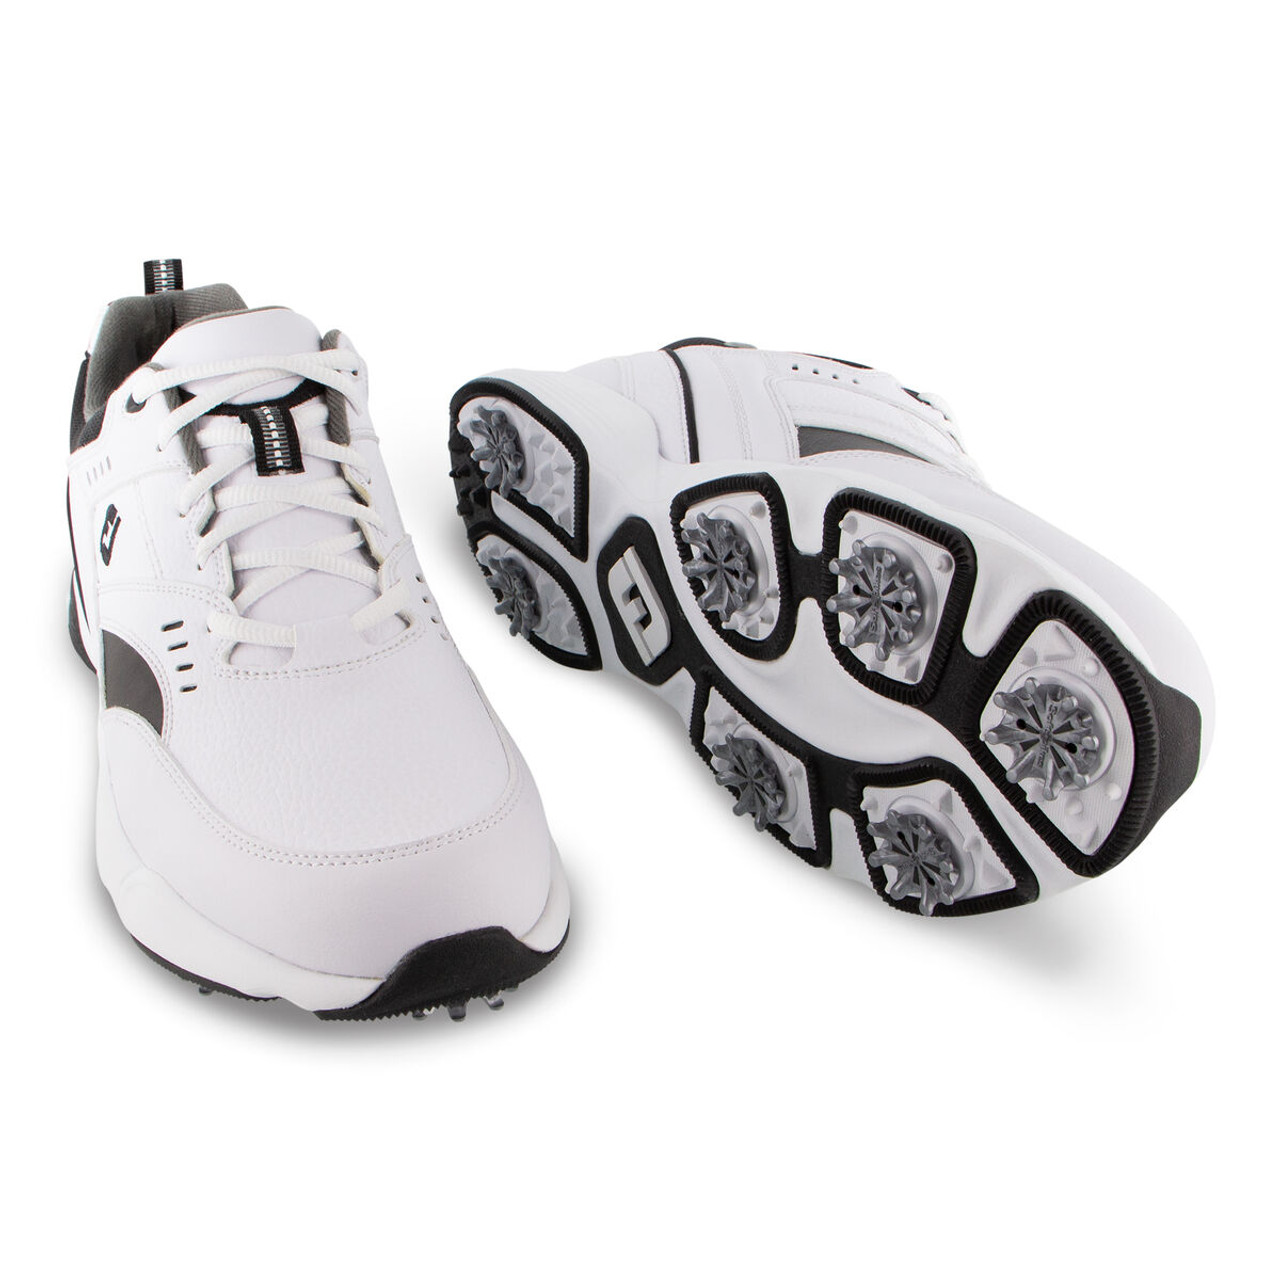 FootJoy Specialty Golf Shoes (White/Black) 56722